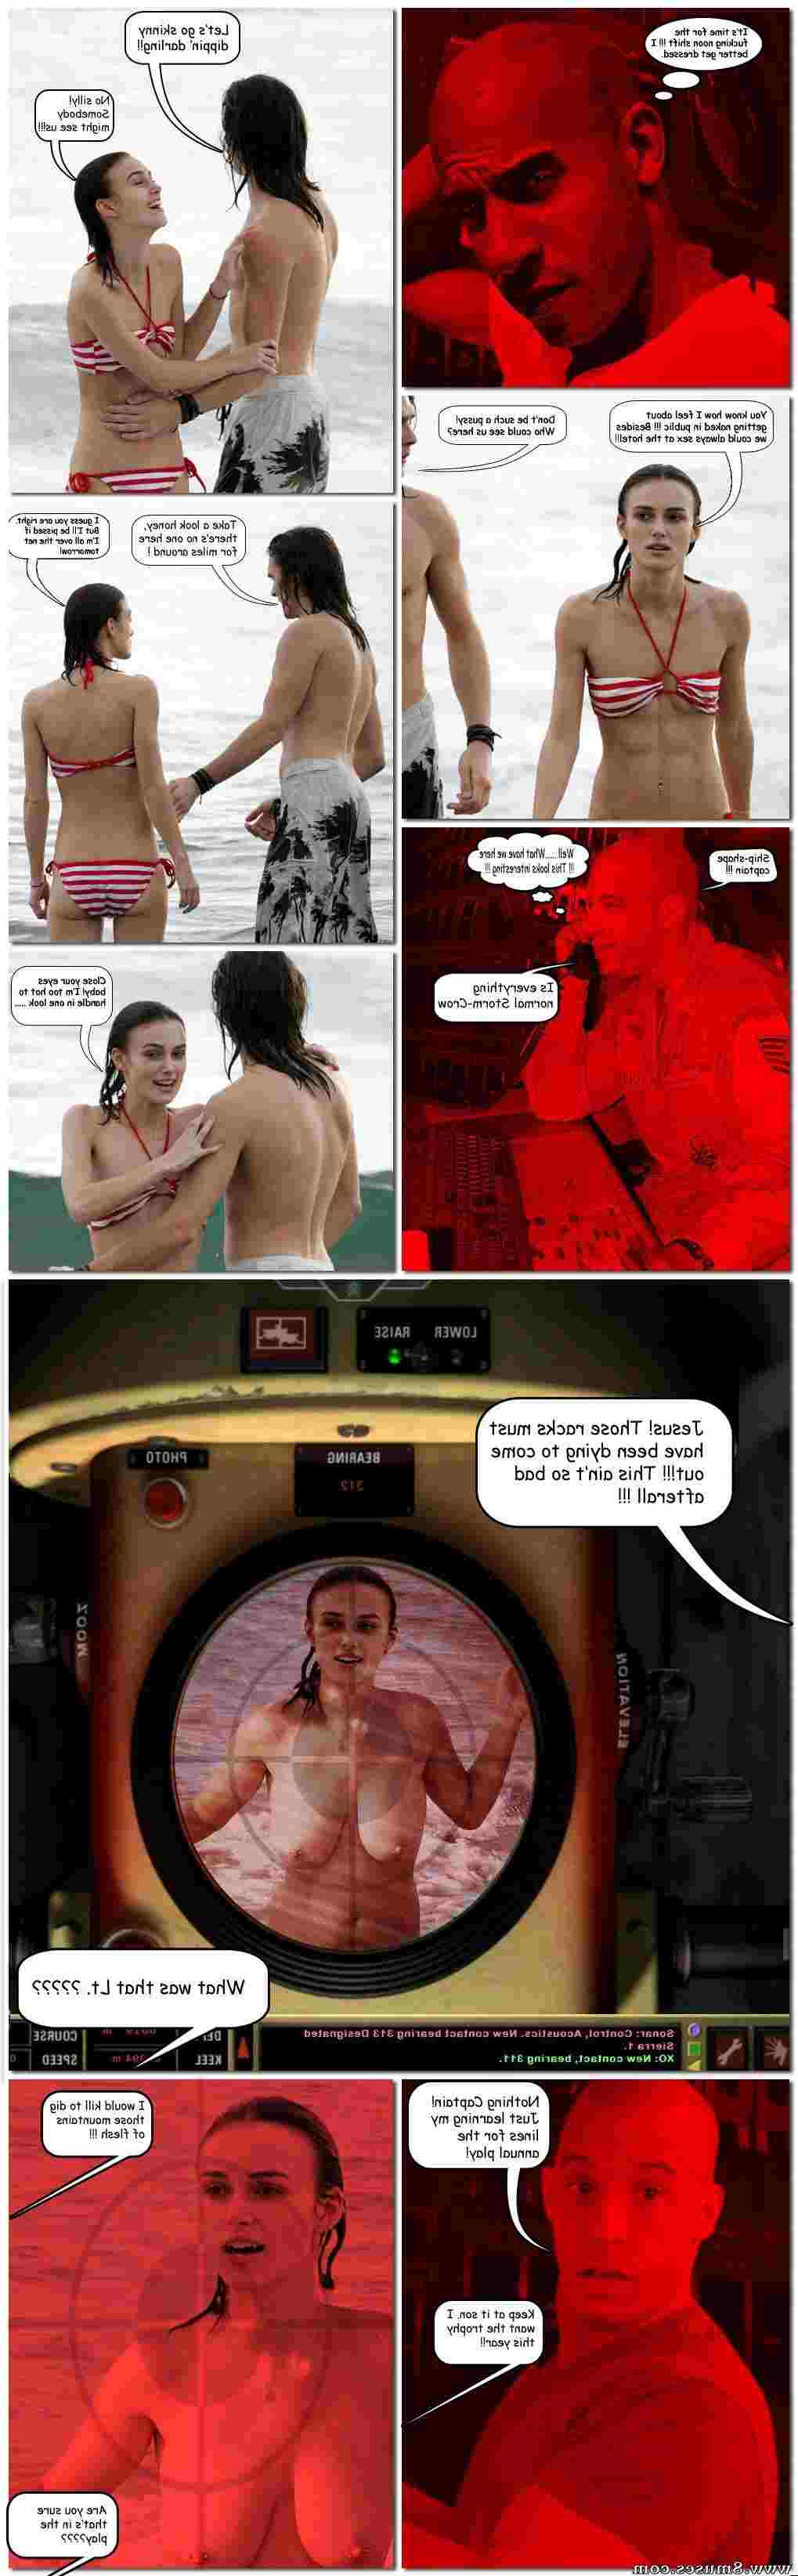 Fake-Celebrities-Sex-Pictures/Keira-Knightley Keira_Knightley__8muses_-_Sex_and_Porn_Comics_267.jpg